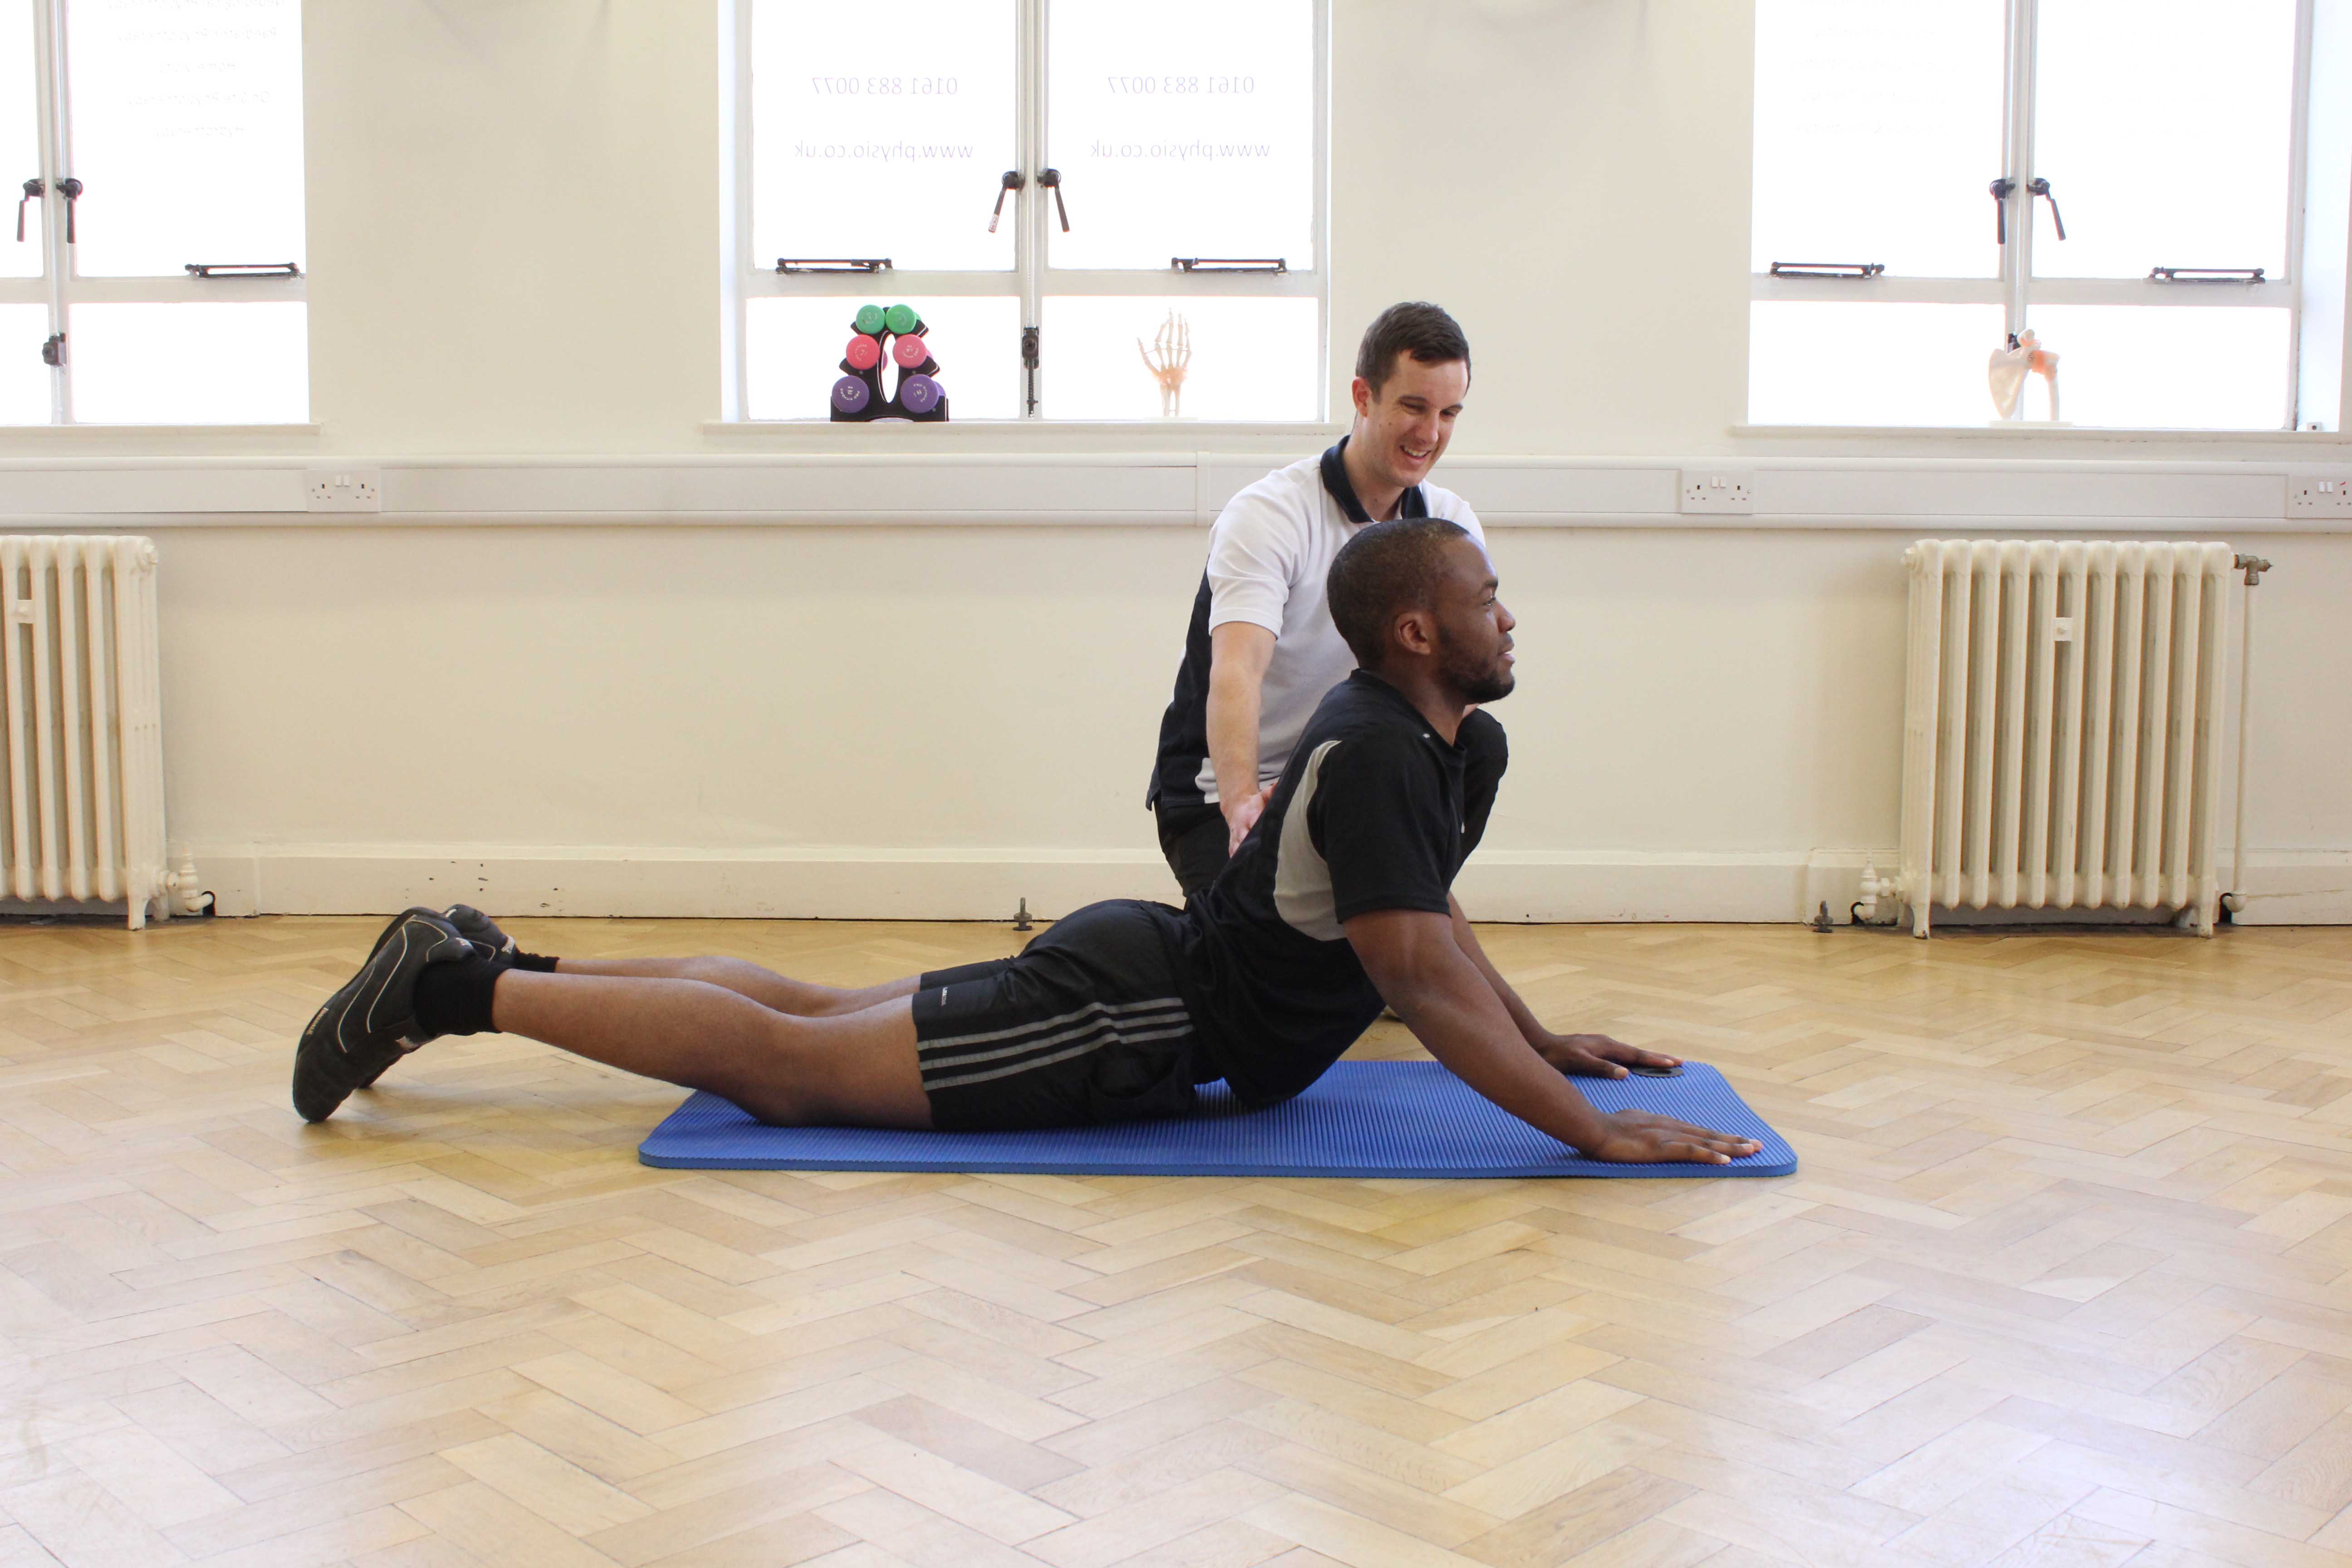 Treatment using the McKenzie concept supervised by experienced physiotherapist